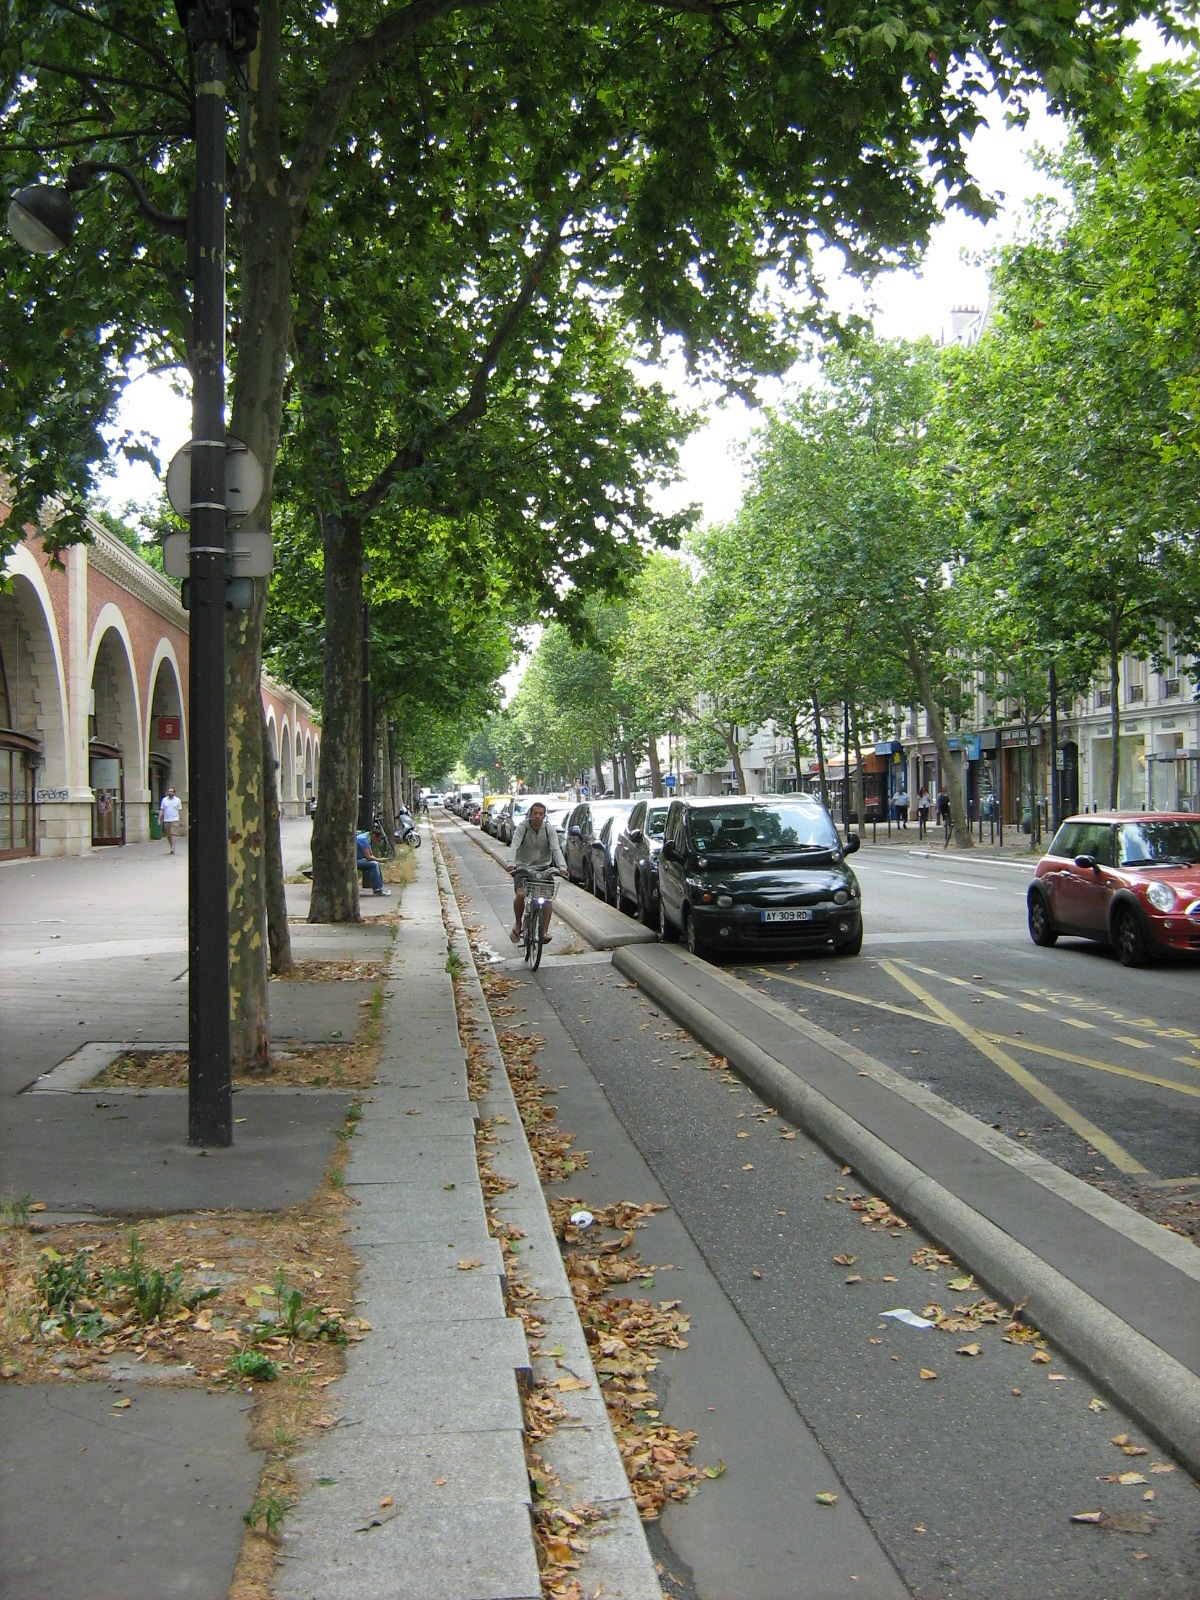 a street with cars and a bike parked next to the street